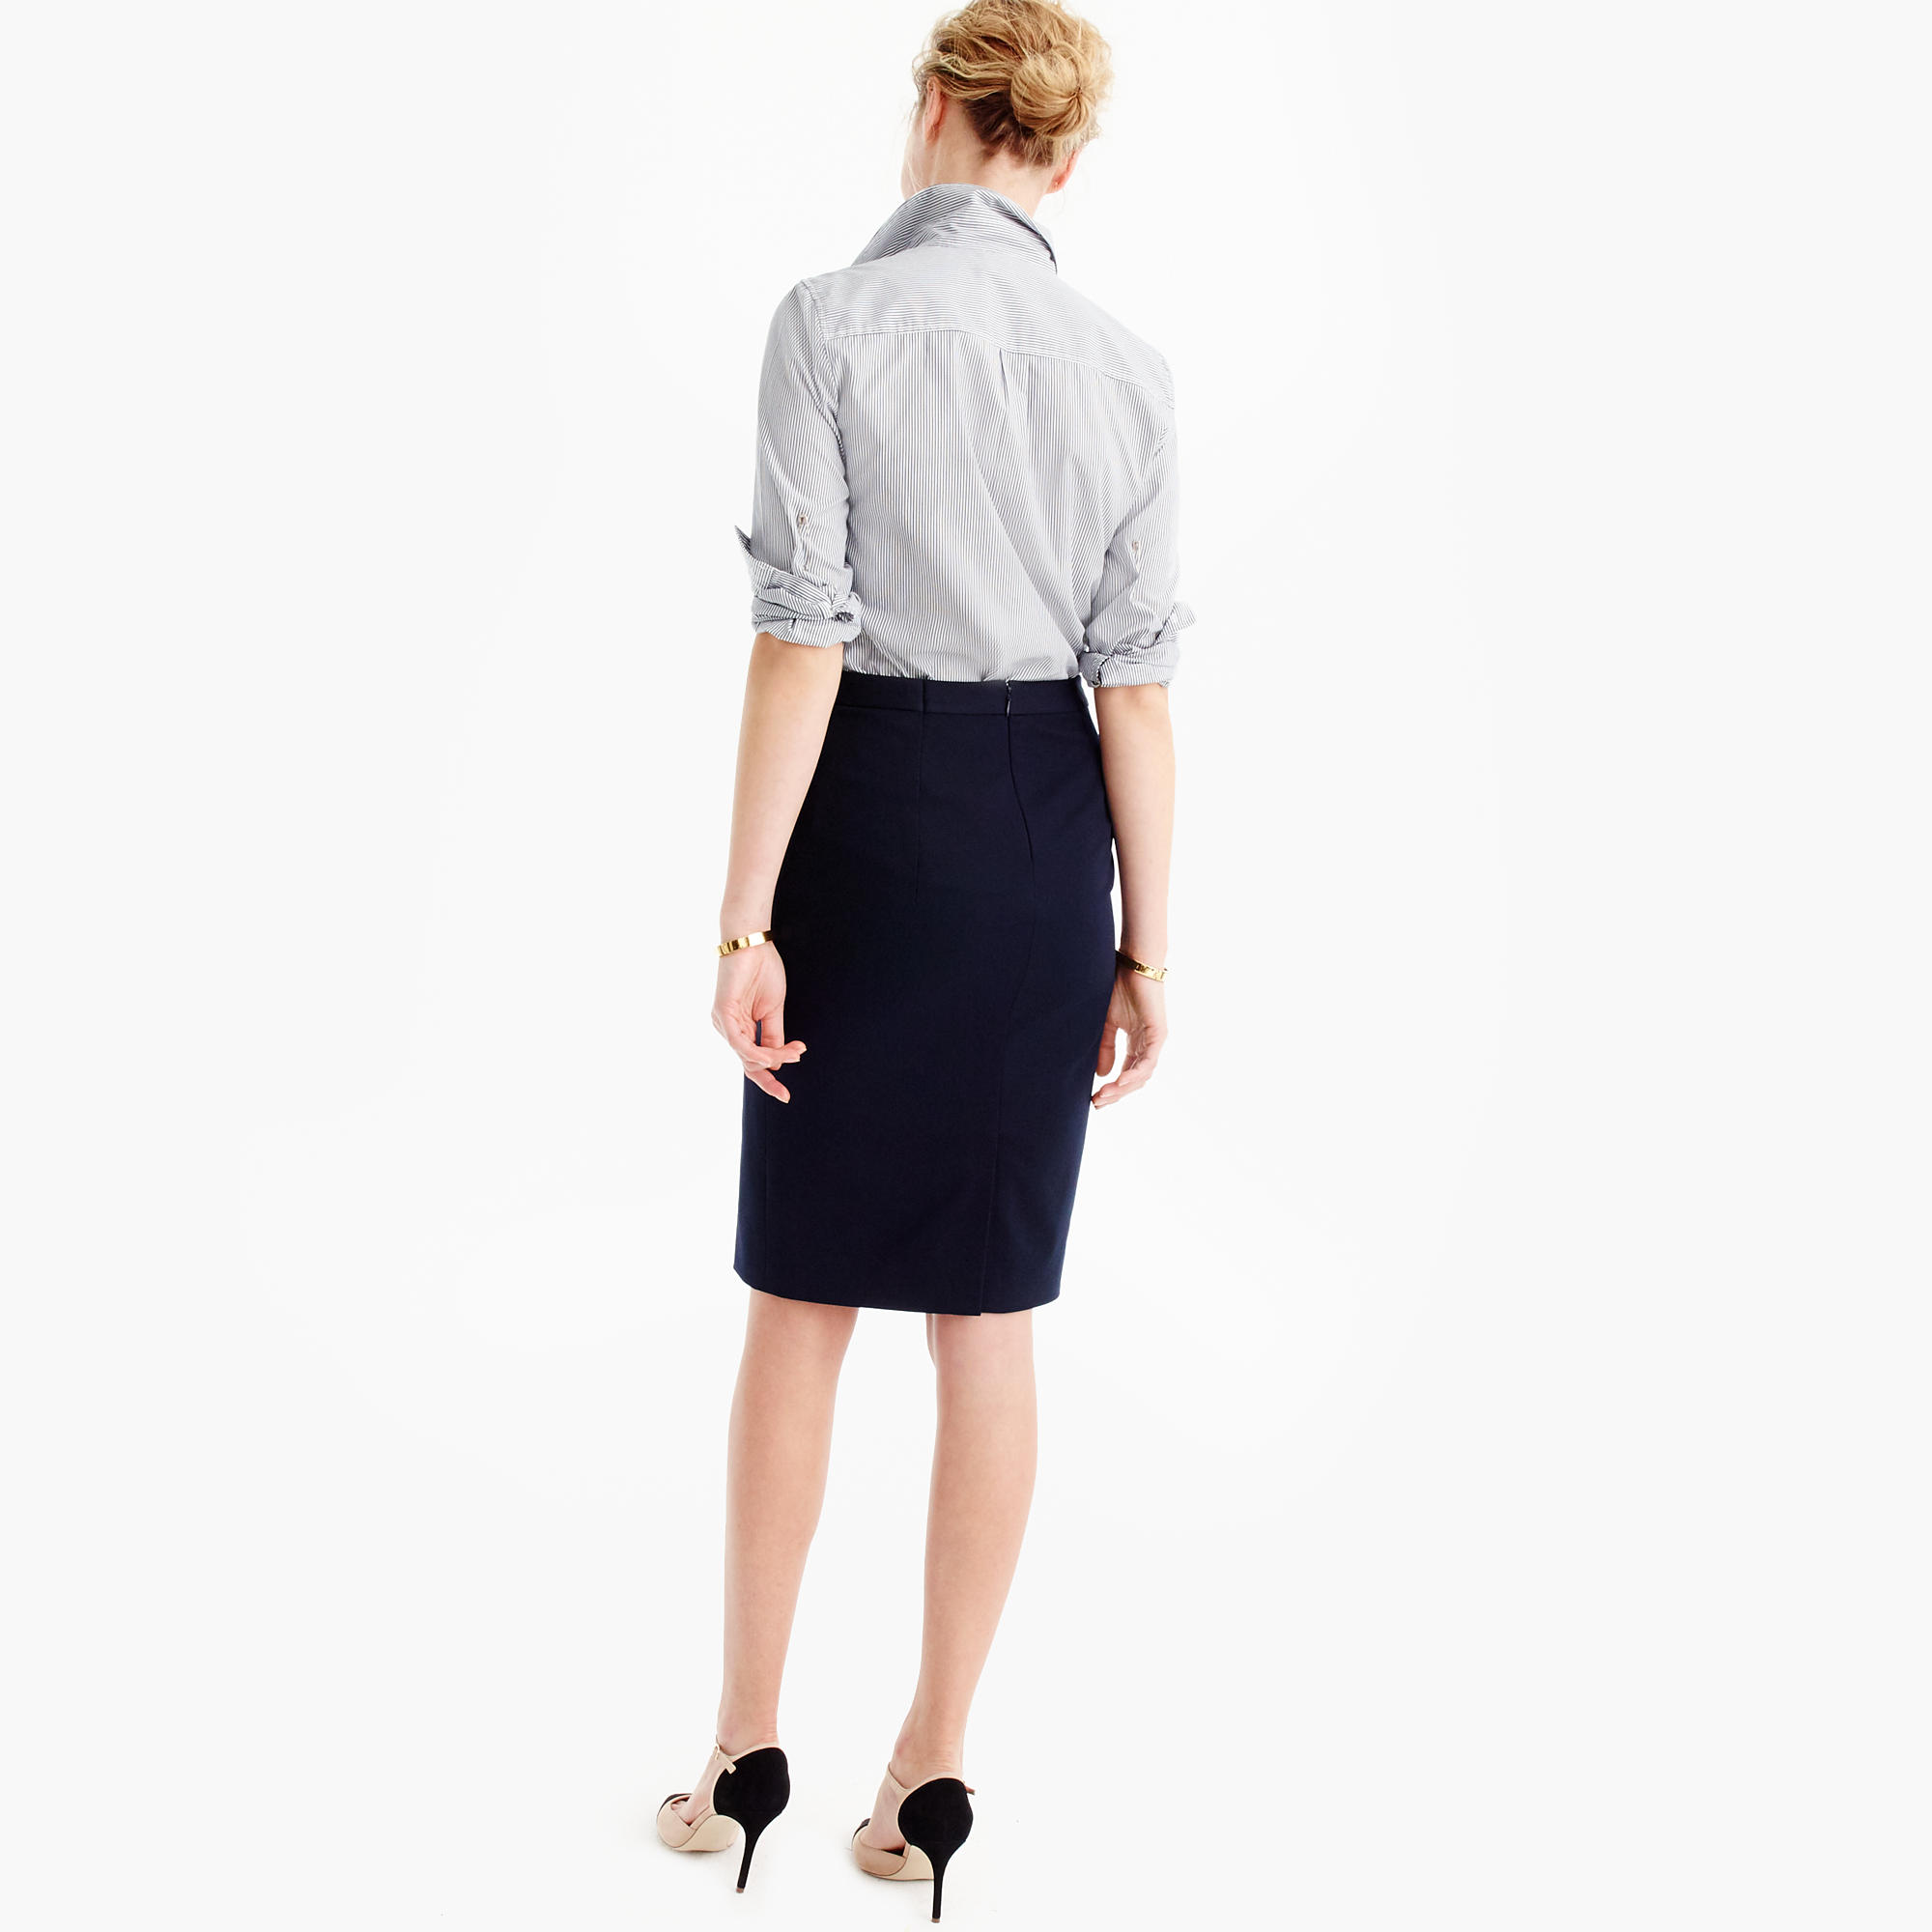 Pencil skirt in two-way stretch cotton : Women pencil | J.Crew